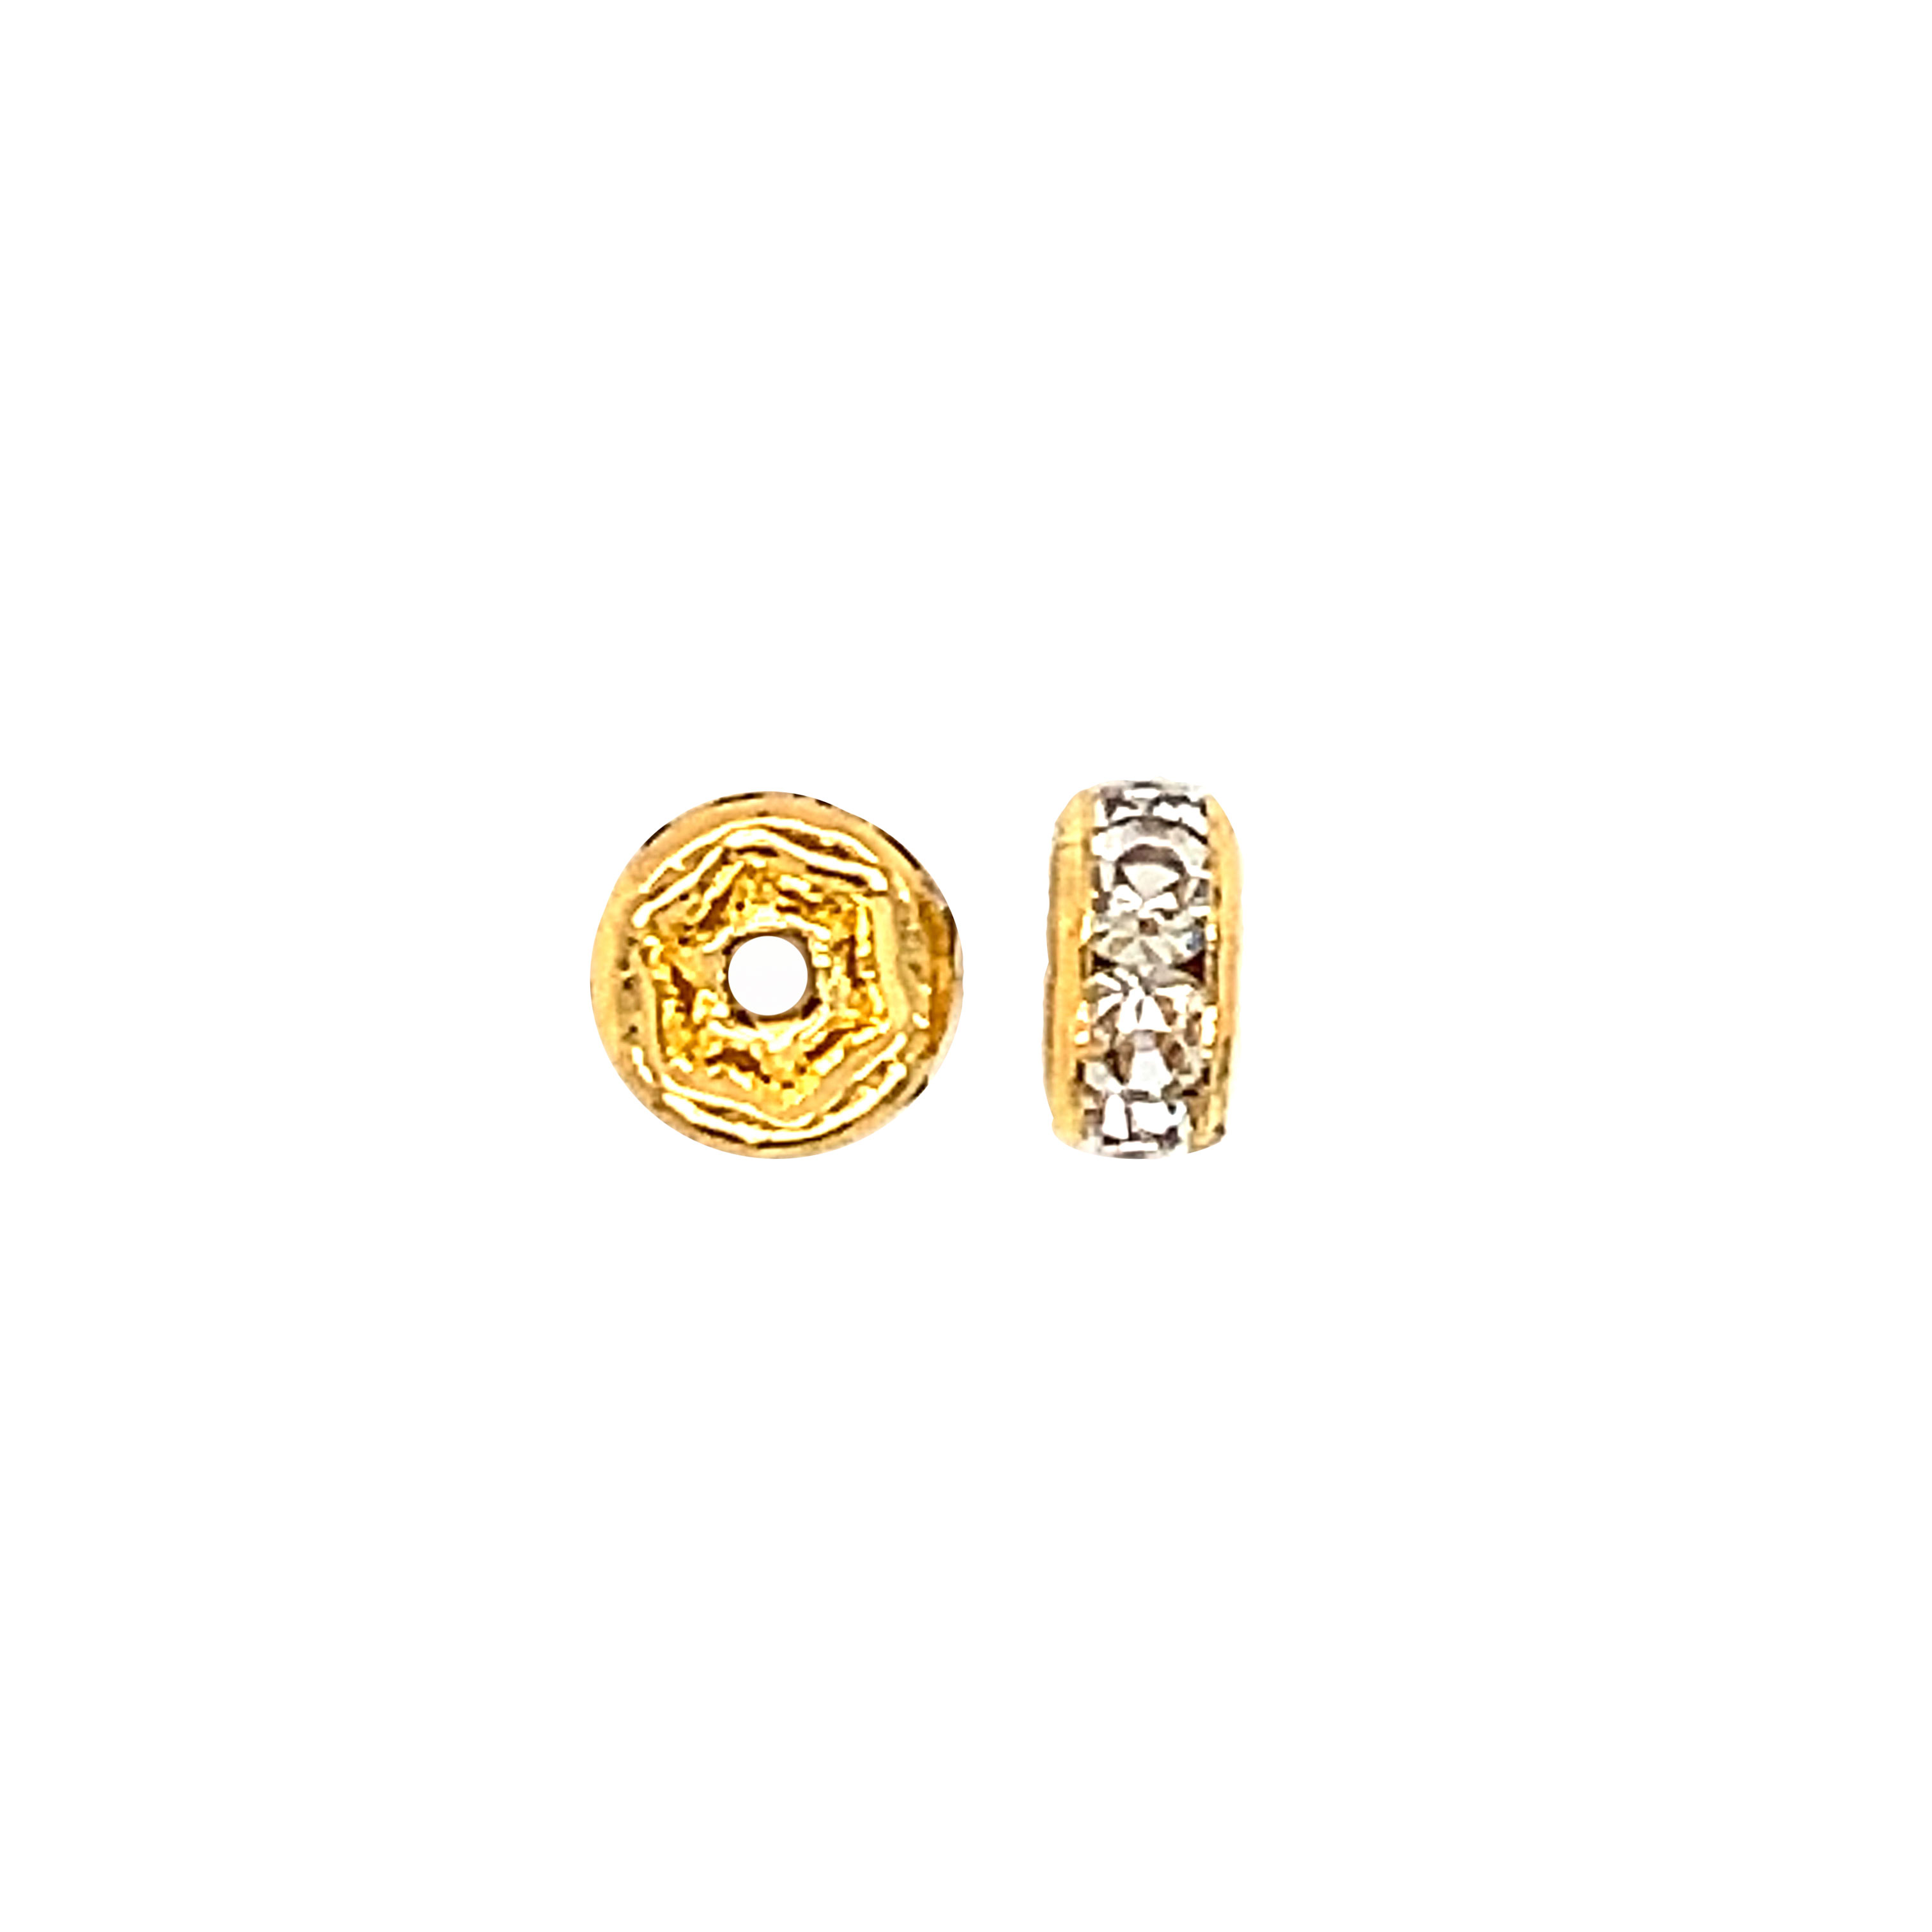 CZ 6mm Gold Tone Rondelle - Pack of 10